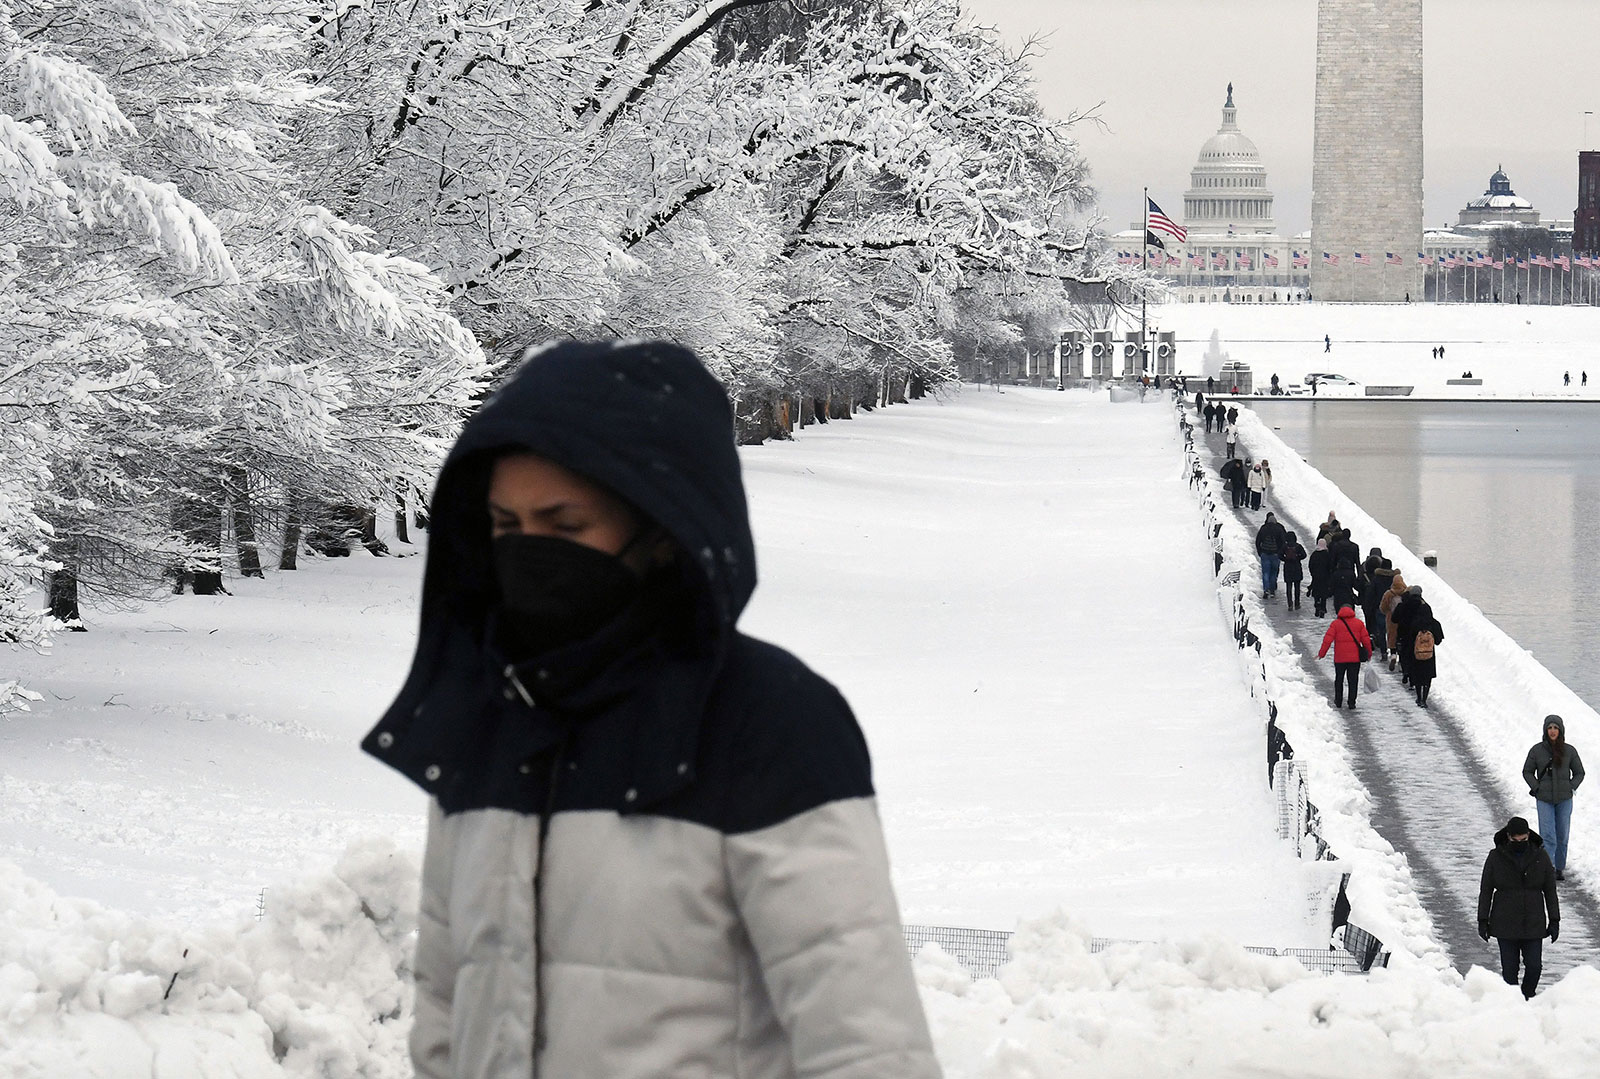 Notable snow totals from the winter storm hitting the MidAtlantic US